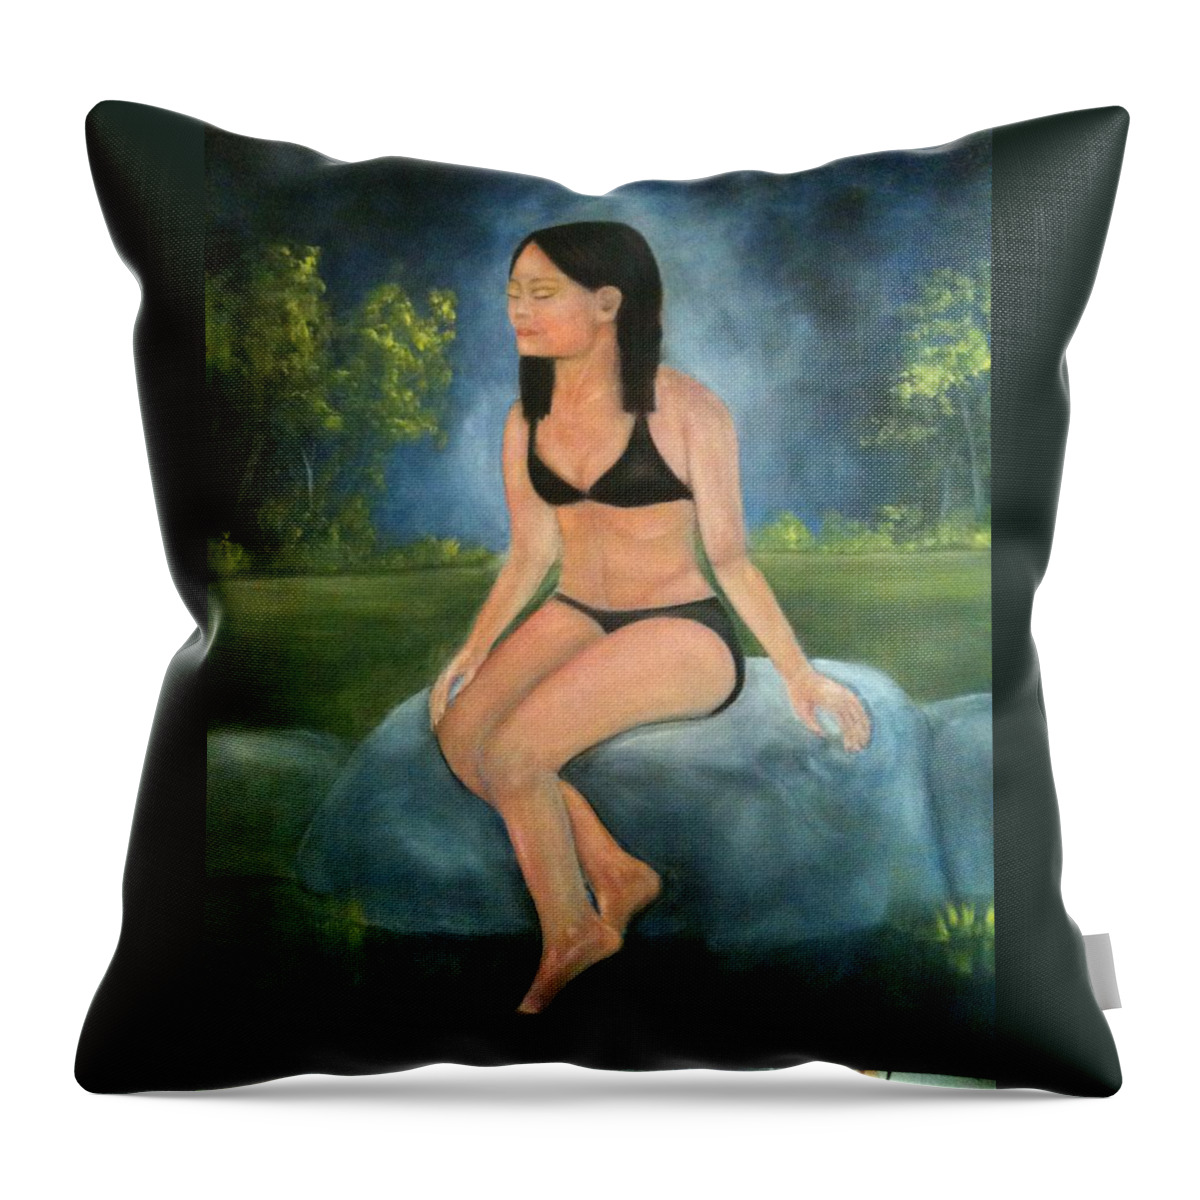 Woman Throw Pillow featuring the painting Evening Swim by Sheila Mashaw